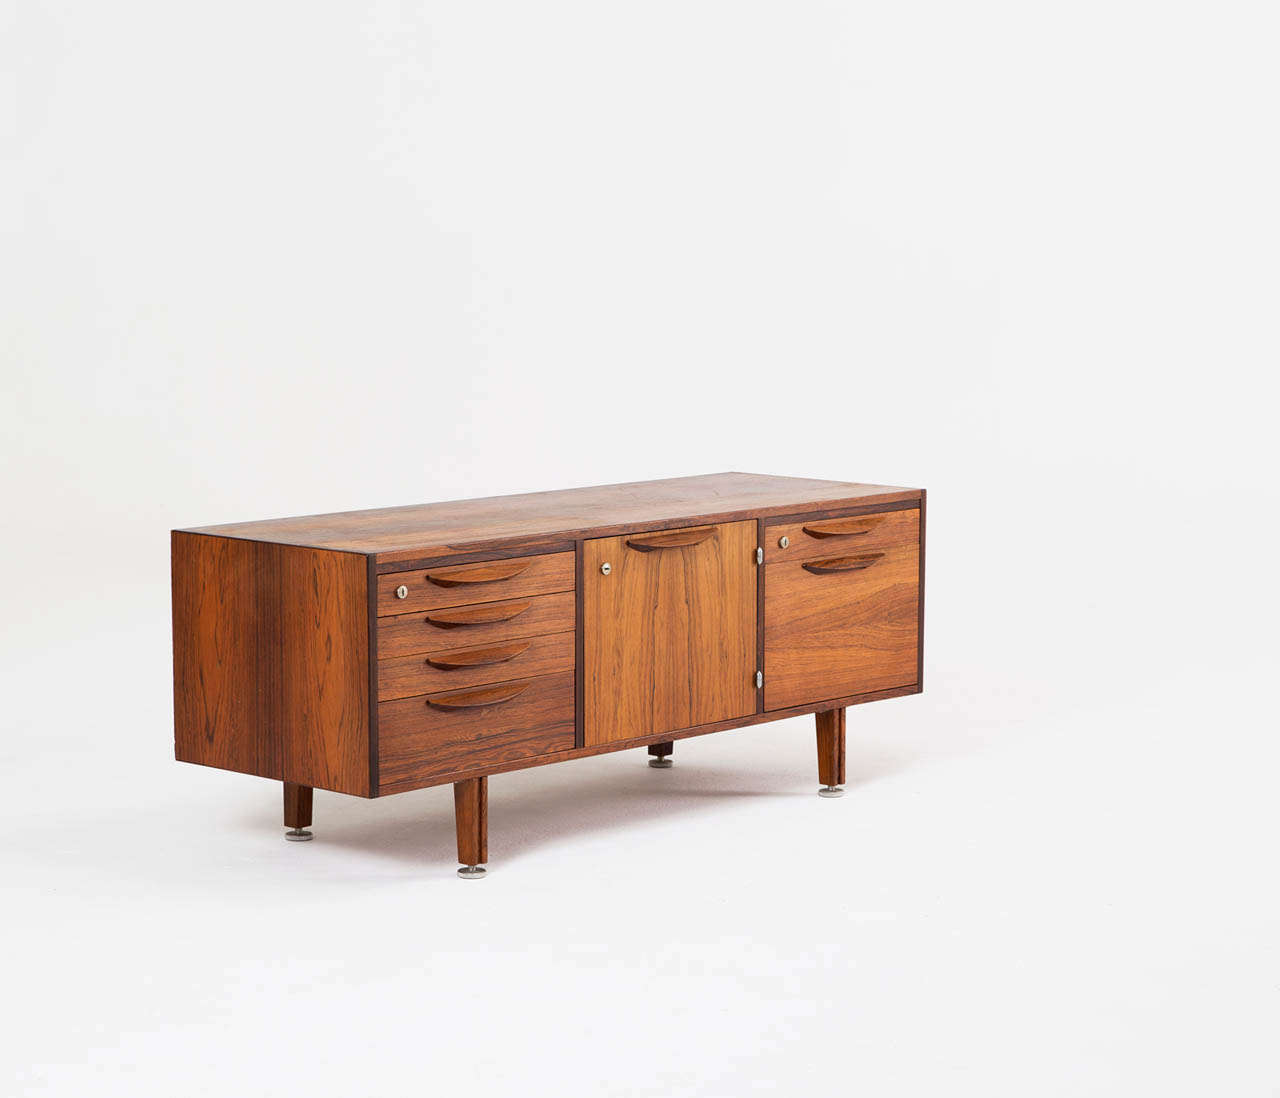 Credenza, rosewood, Denmark, 1960s.

Beautiful rosewood credenza by the American/Danish designer Jens Risom with his signature door crescent handles and base design. A total of six pull-out drawers and one middle cabinet, all lockable and nicely